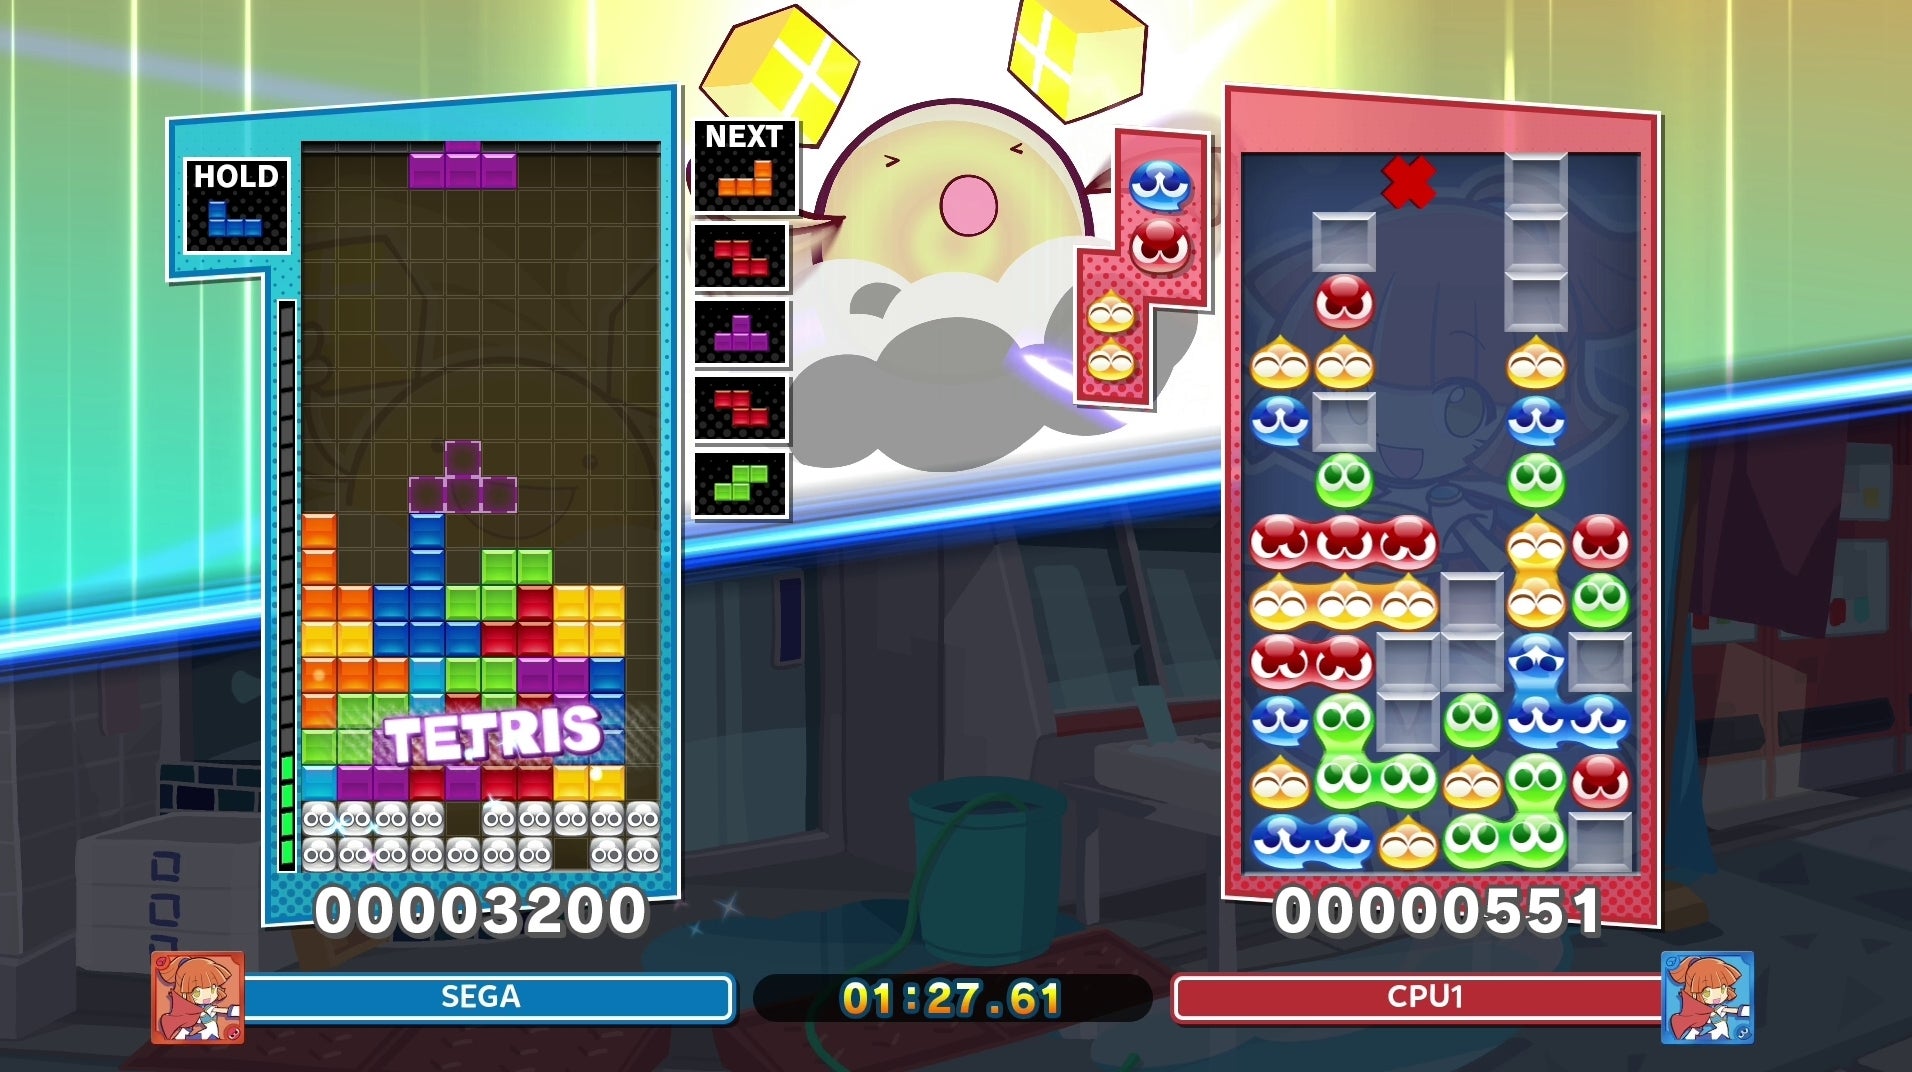 Image for Puyo Puyo Tetris 2 is out later this year with a new adventure mode